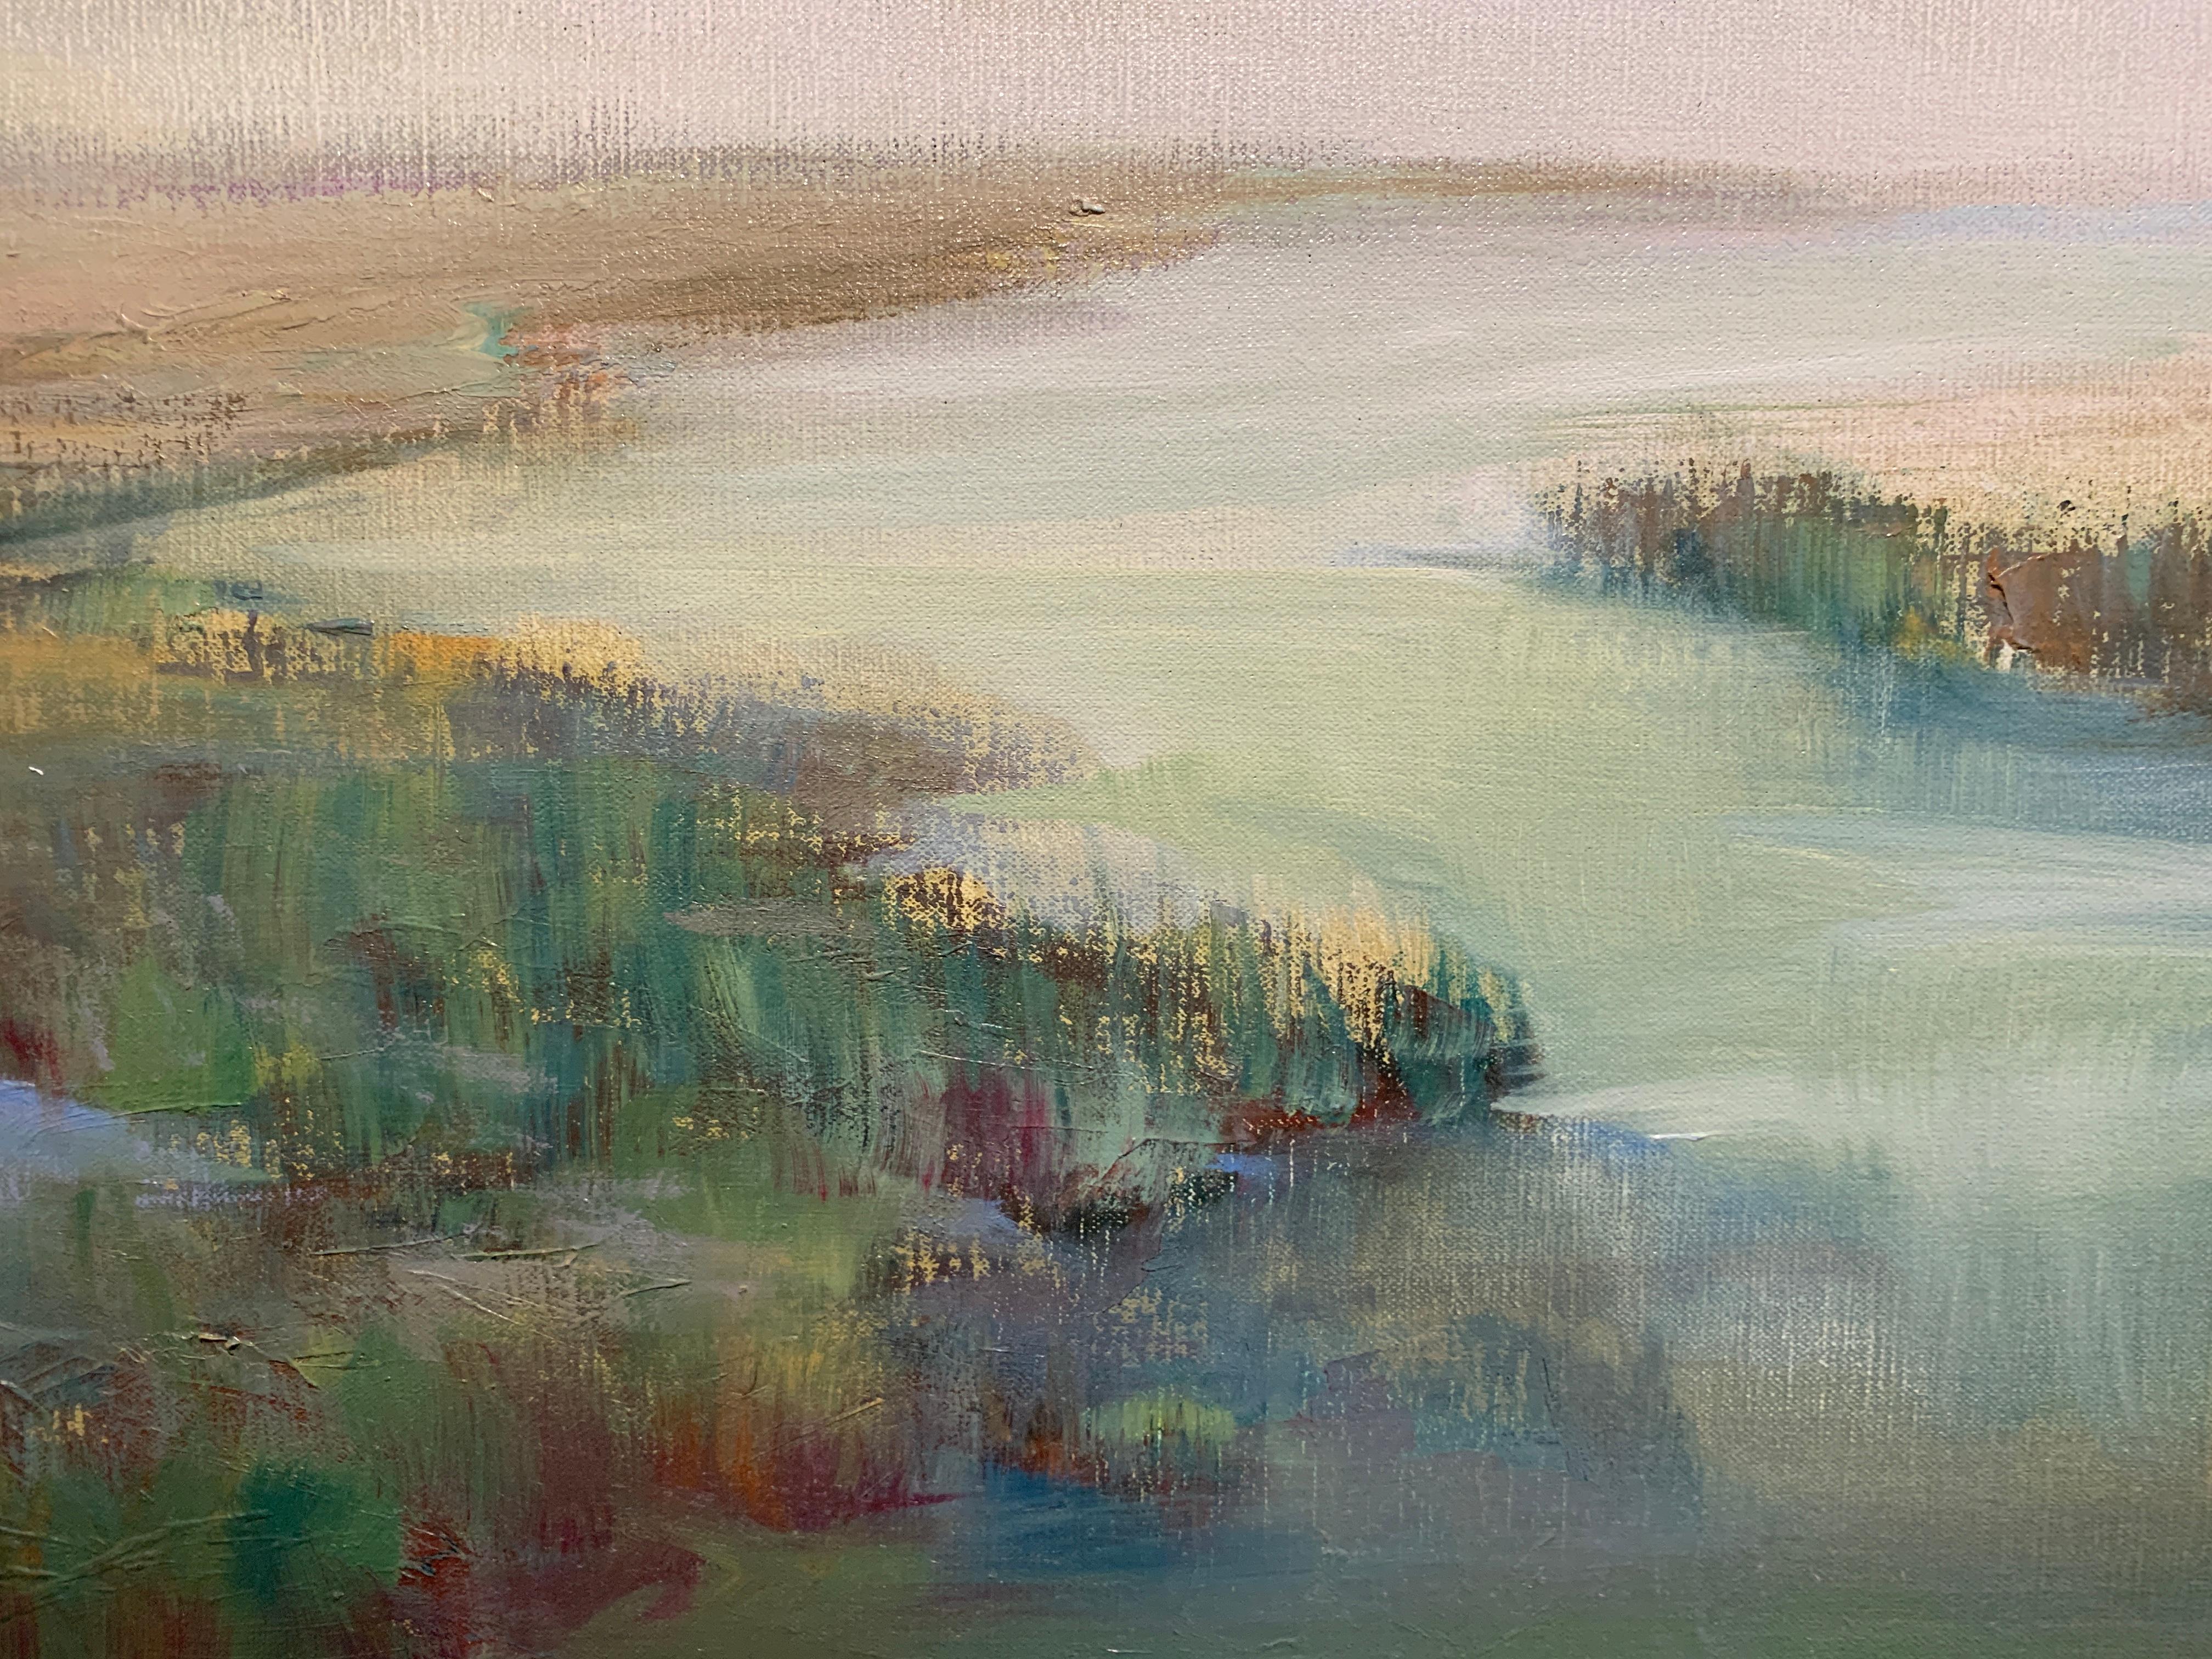 The Clearing Clouds by Julie Houck, Oil on Linen Post-Impressionist Painting 2